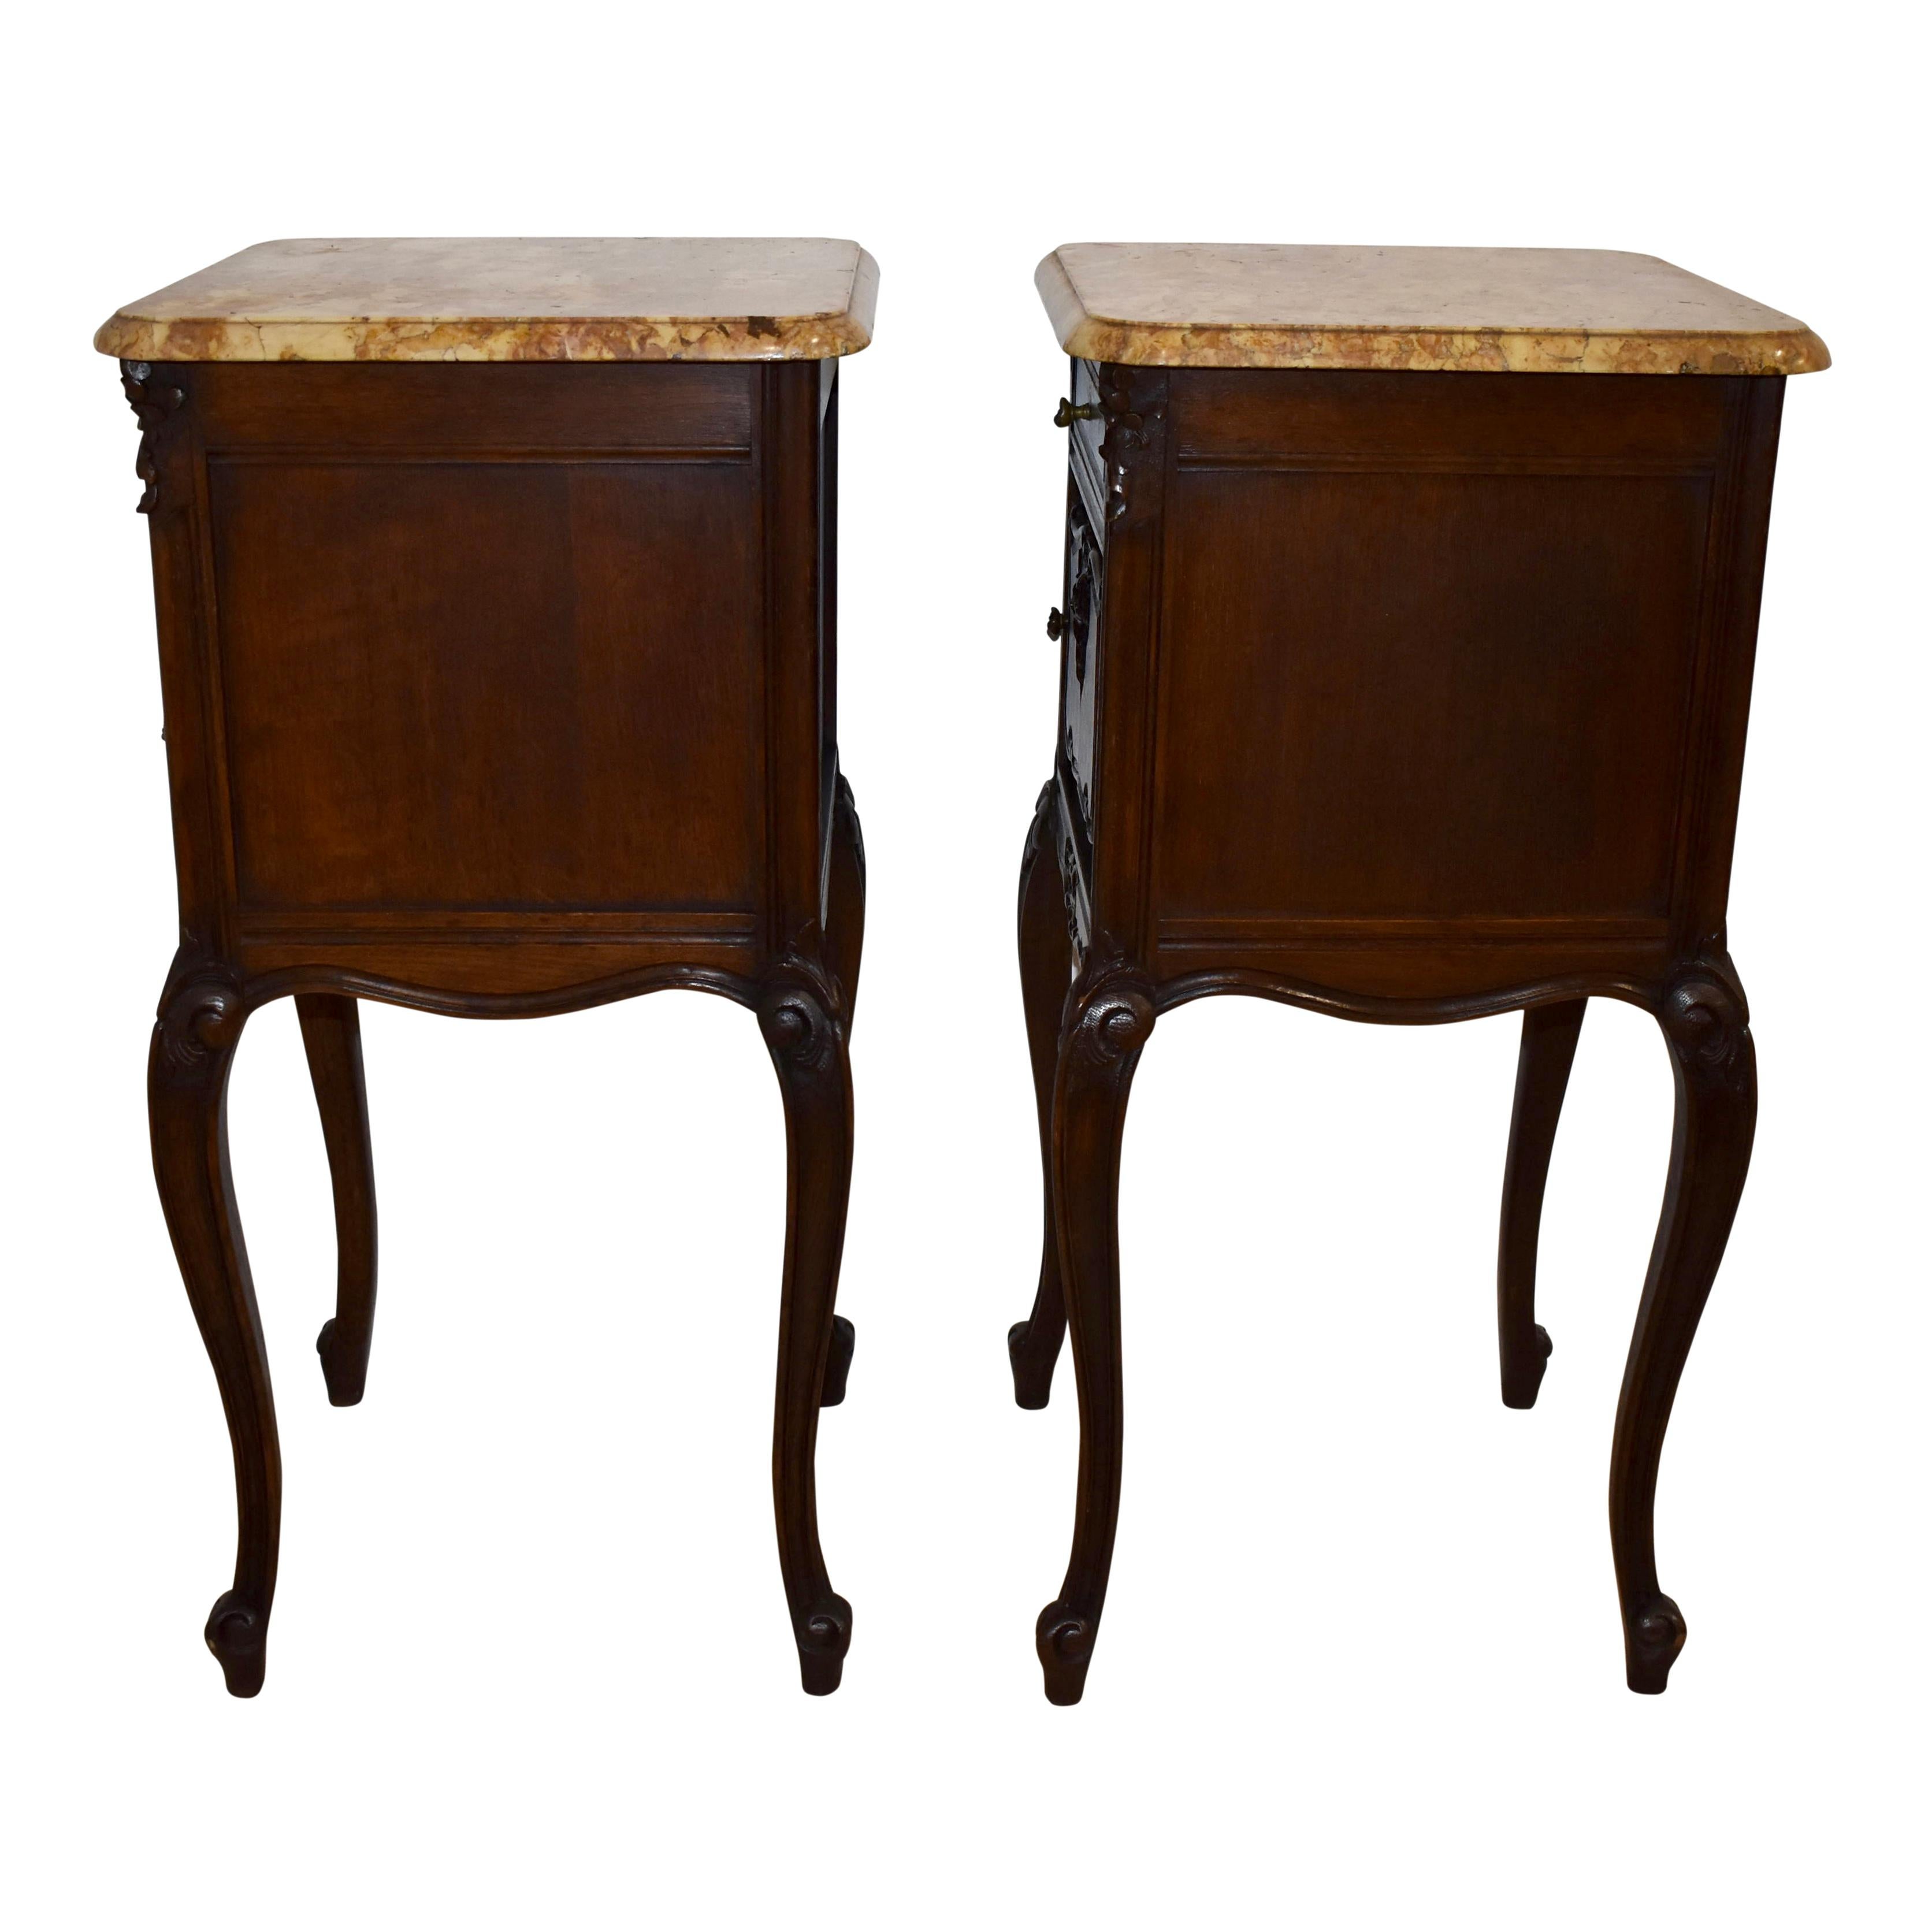 Pair of Carved Oak Nightstand Bedside Tables with Mable Tops, Circa 1900 For Sale 3